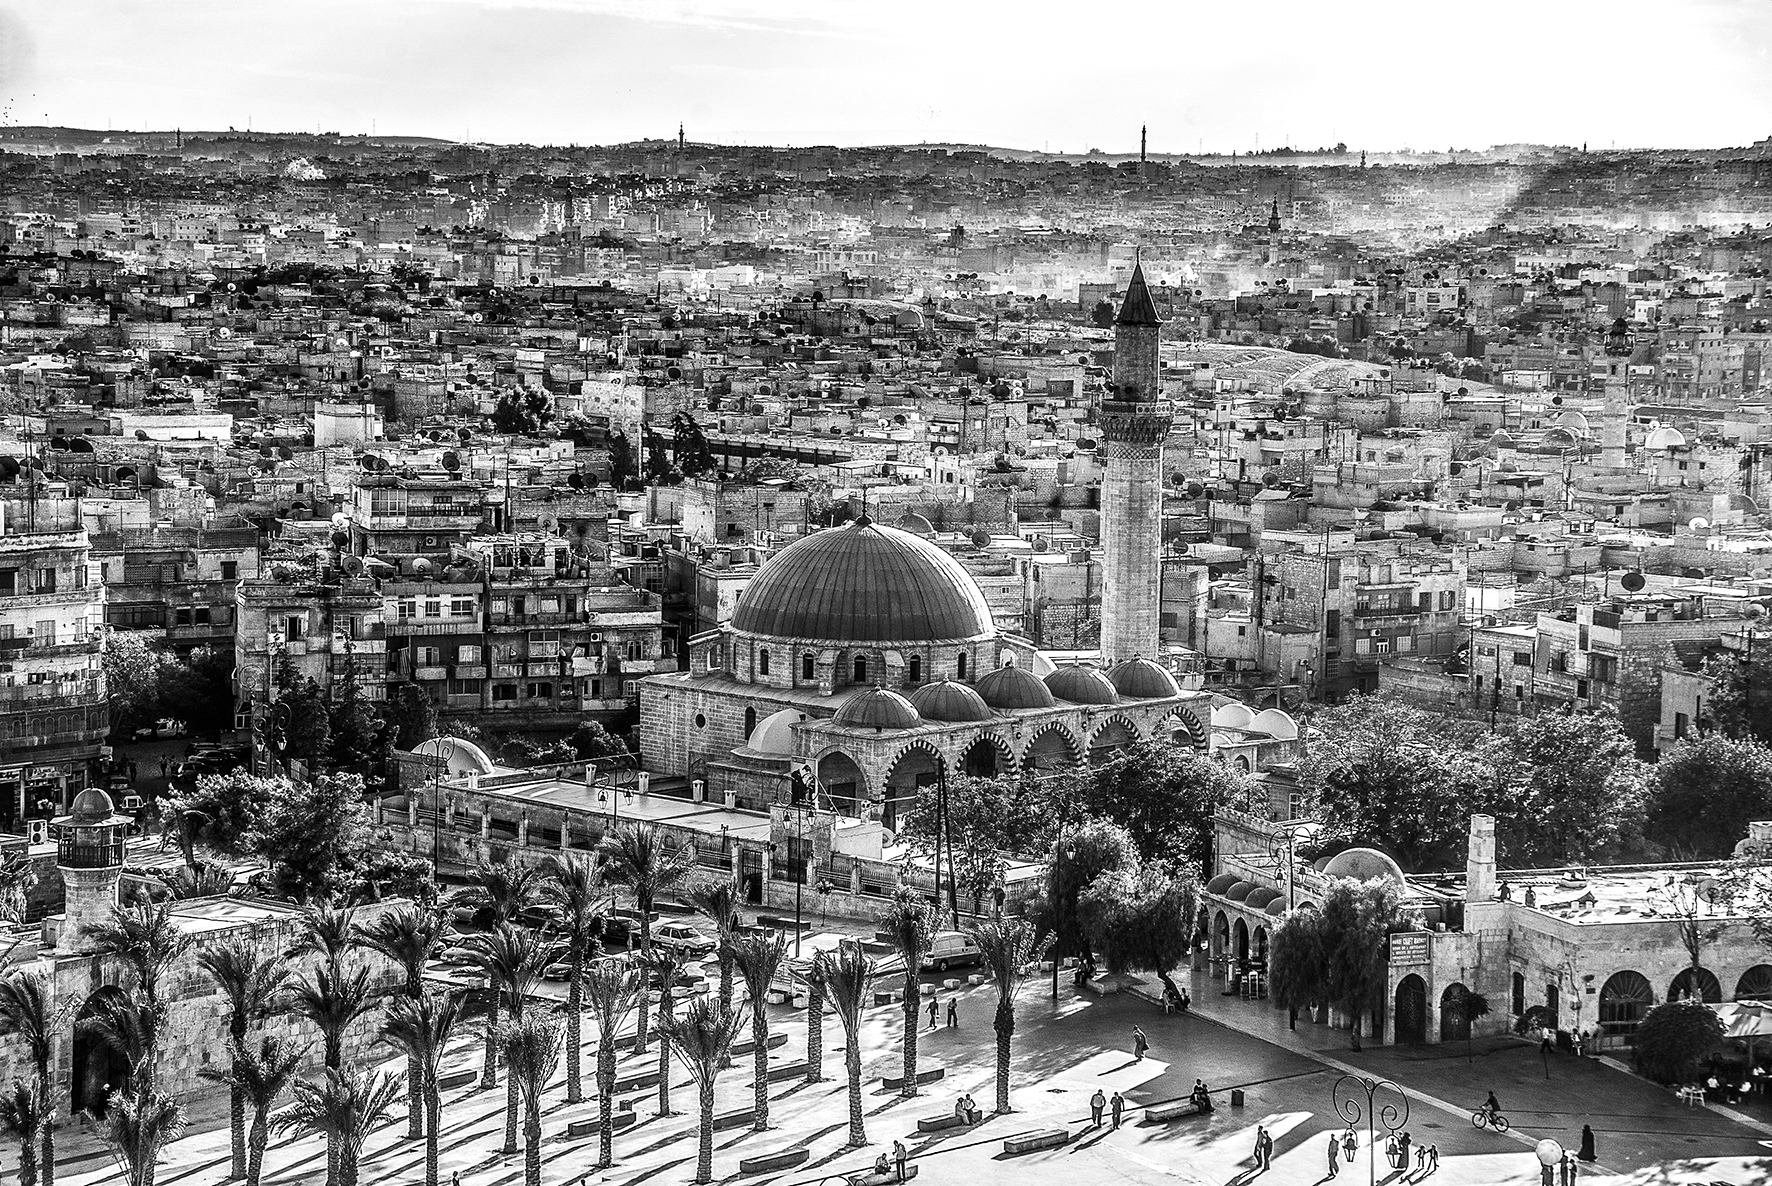 View of the ancient city and the Khusruwiyah Mosque. Aleppo, SYRIA